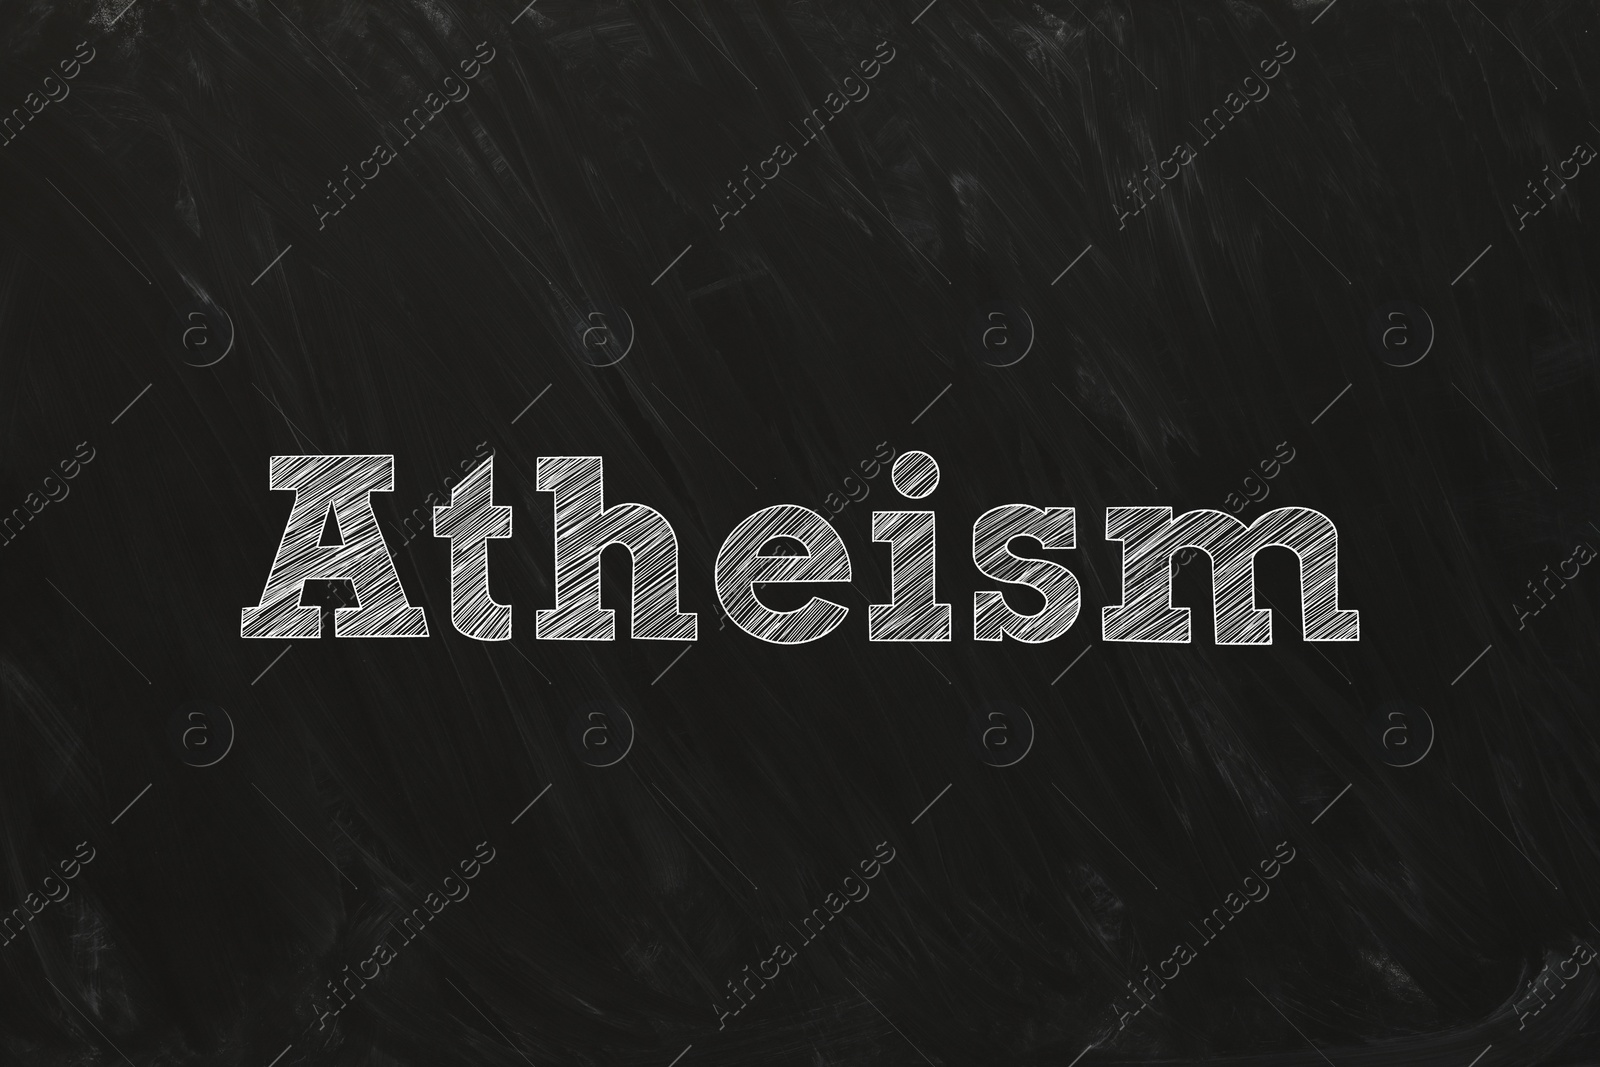 Illustration of Word Atheism written on black chalkboard. Philosophical or religious position